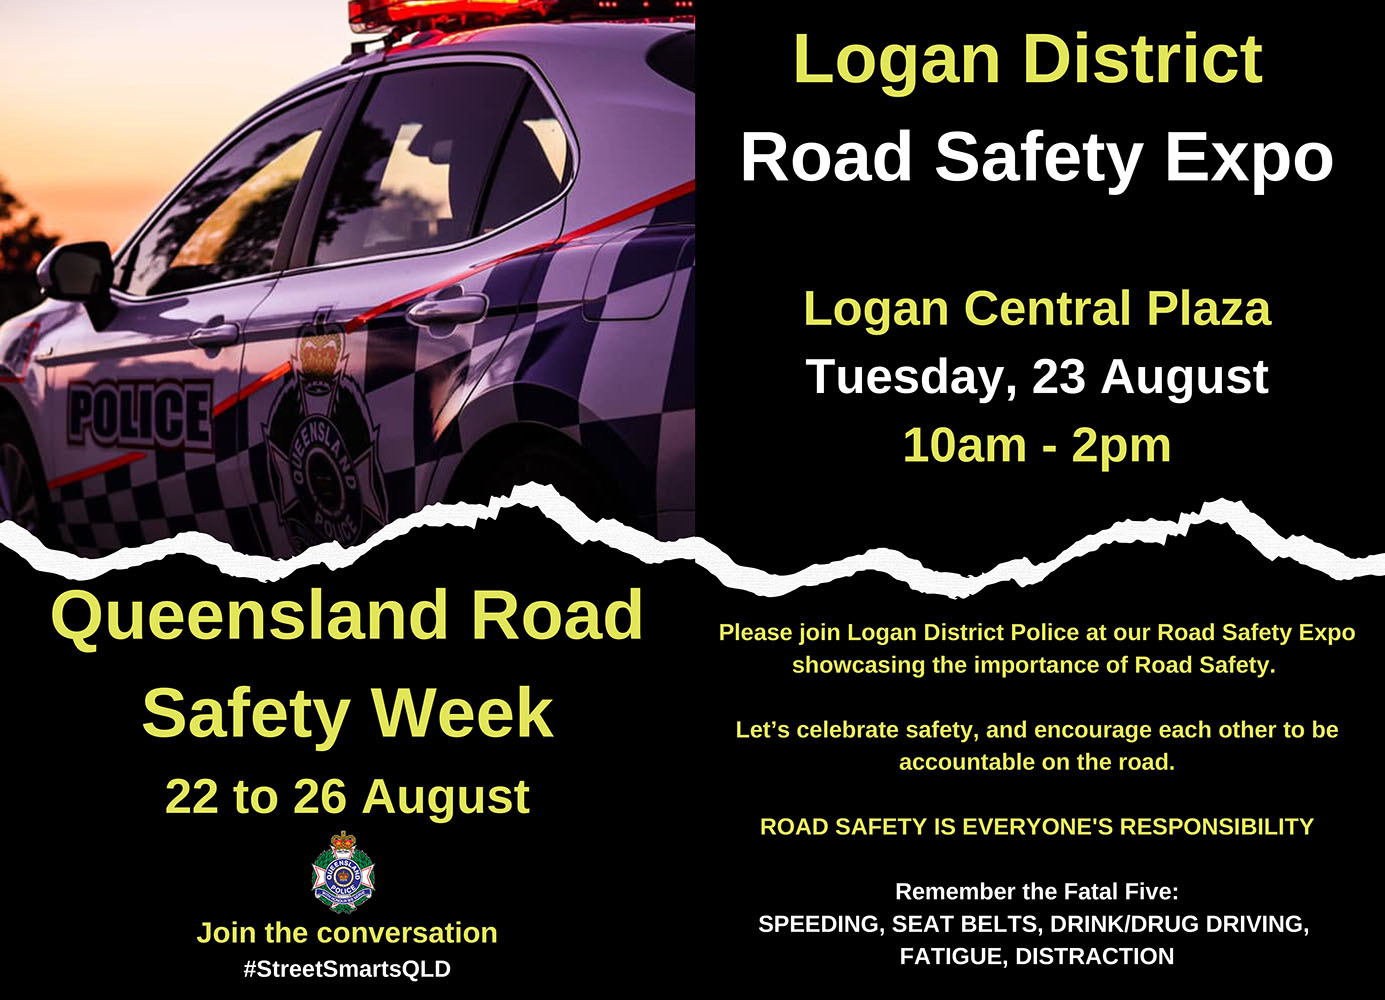 Logan District Road Safety Expo